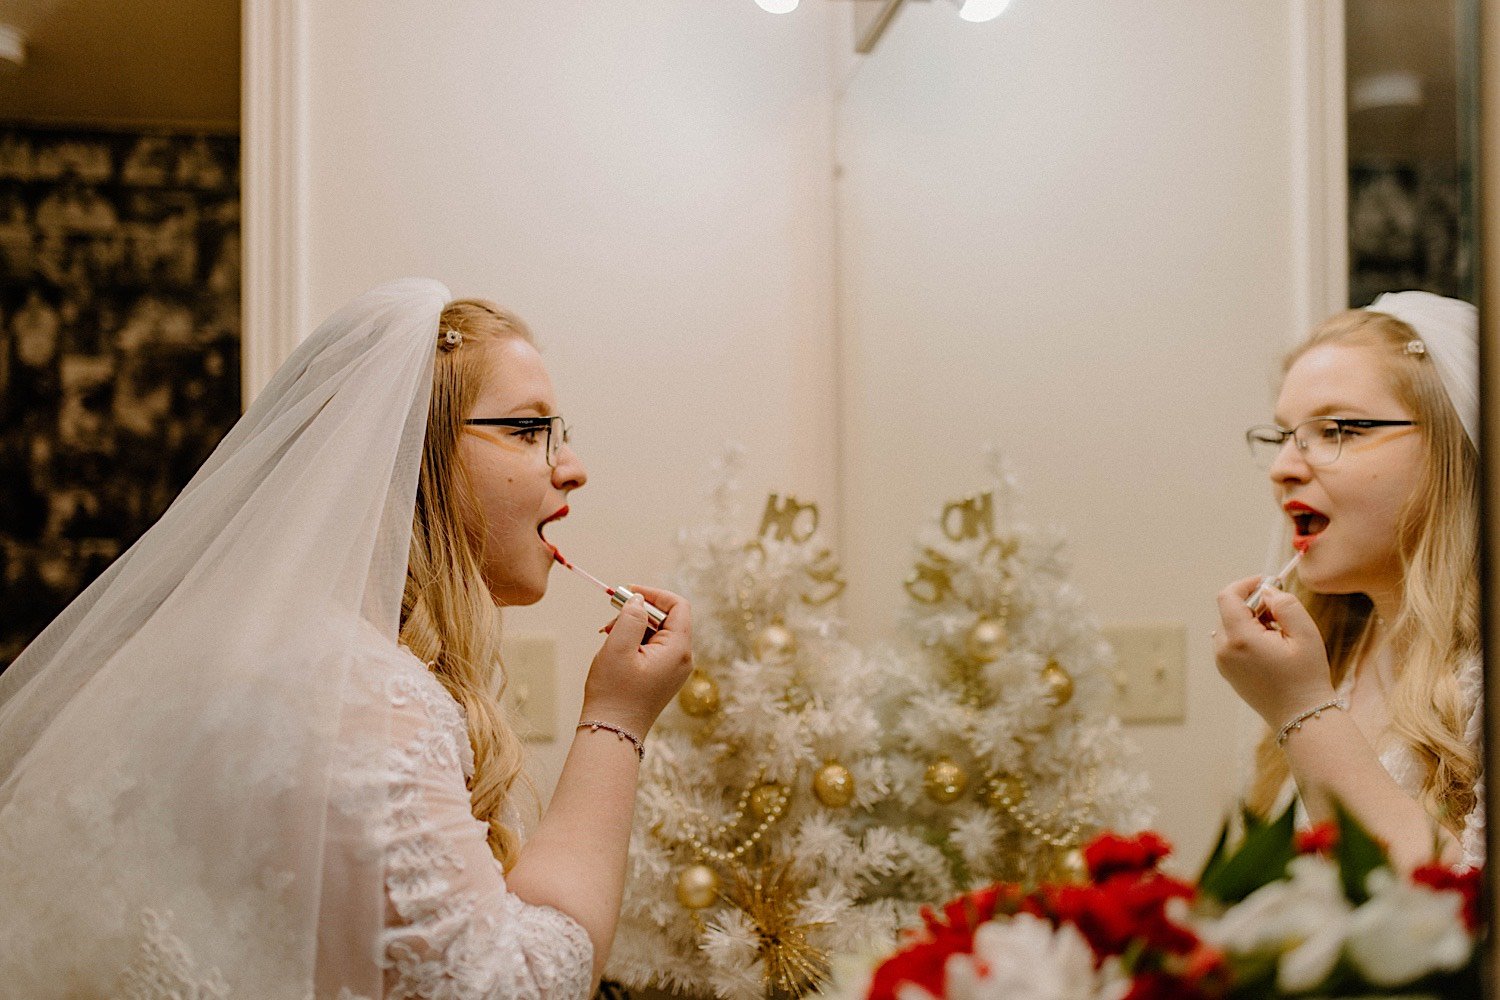 Bride puts lipstick on in the mirror while wearing her wedding gown